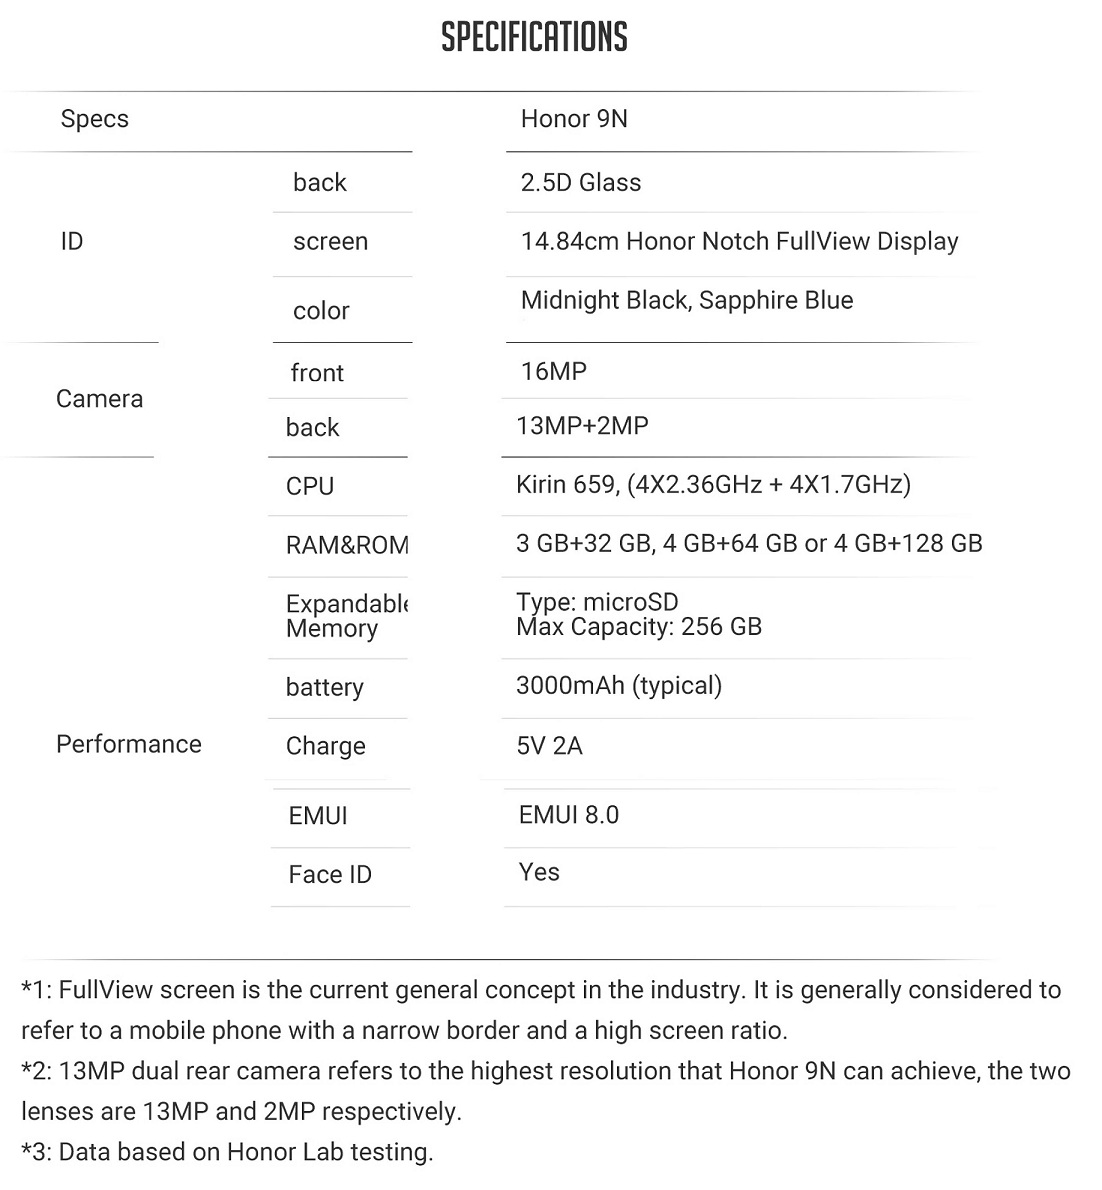 Honor 9N's Intrigue Specification